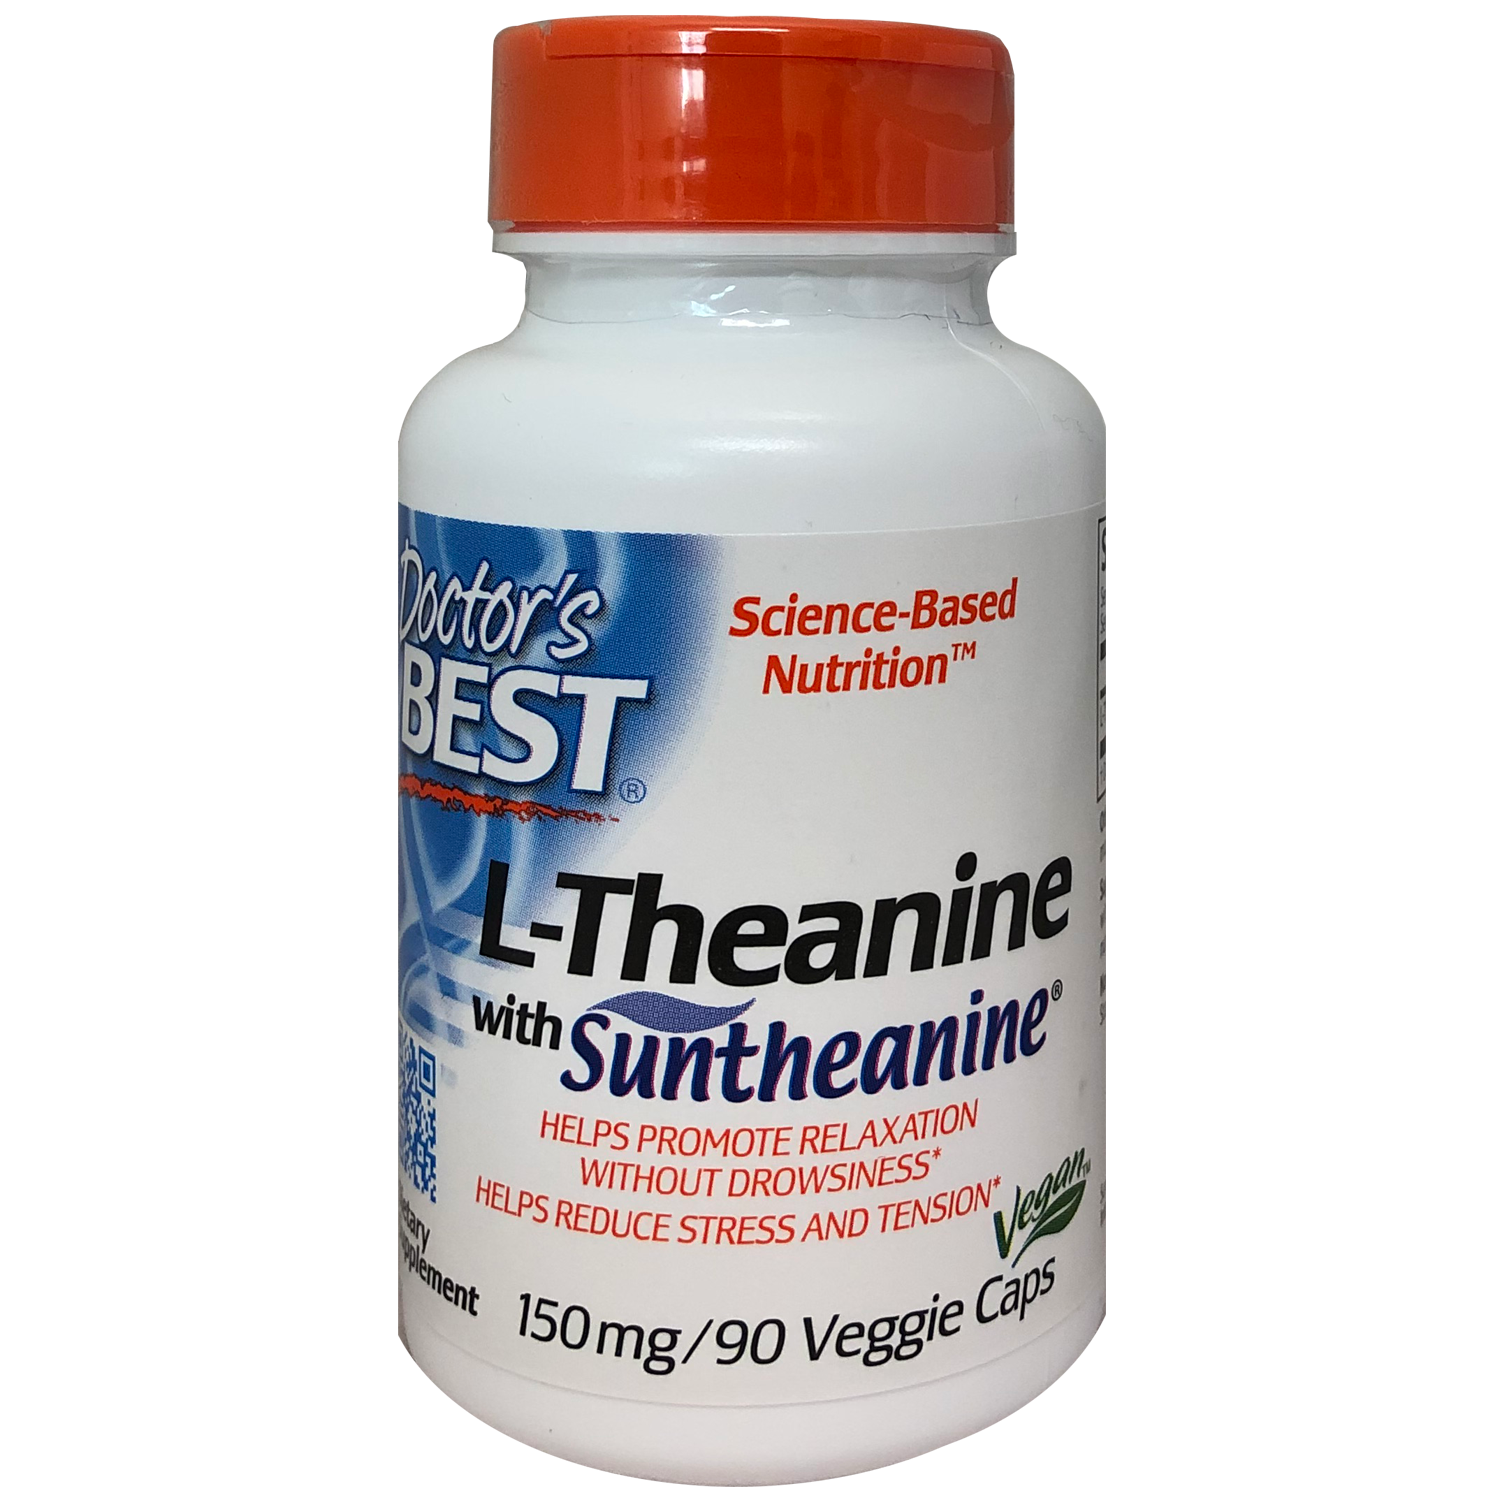 Doctor's Best L-Theanine with Suntheanine 150mg